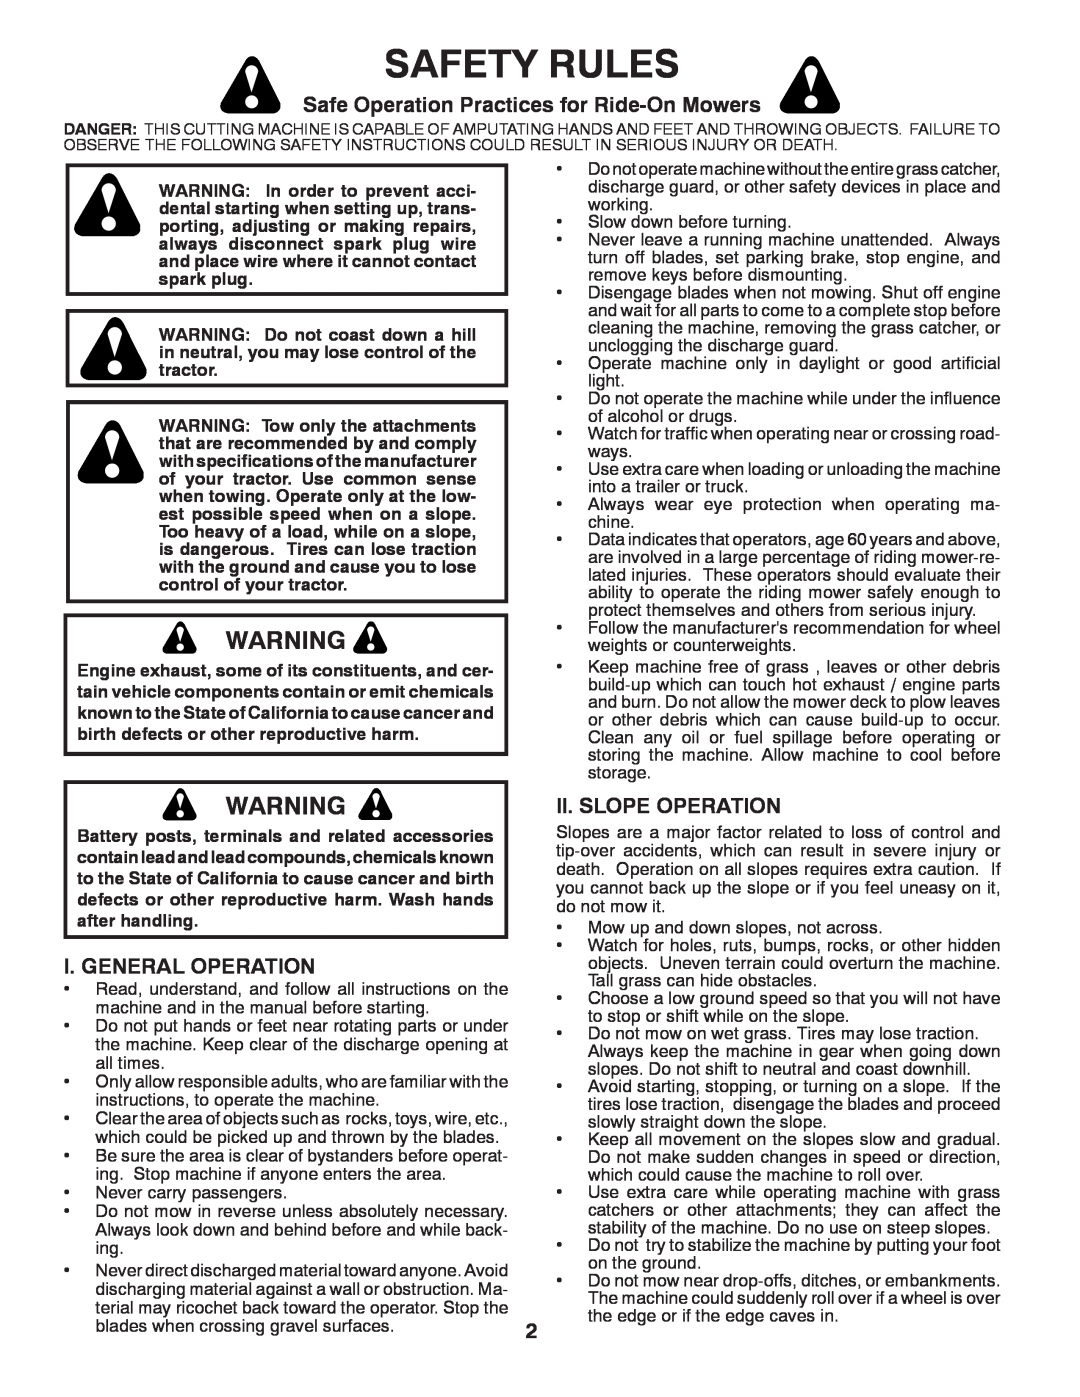 Poulan PB20H42LT Safety Rules, Safe Operation Practices for Ride-On Mowers, I. General Operation, Ii. Slope Operation 